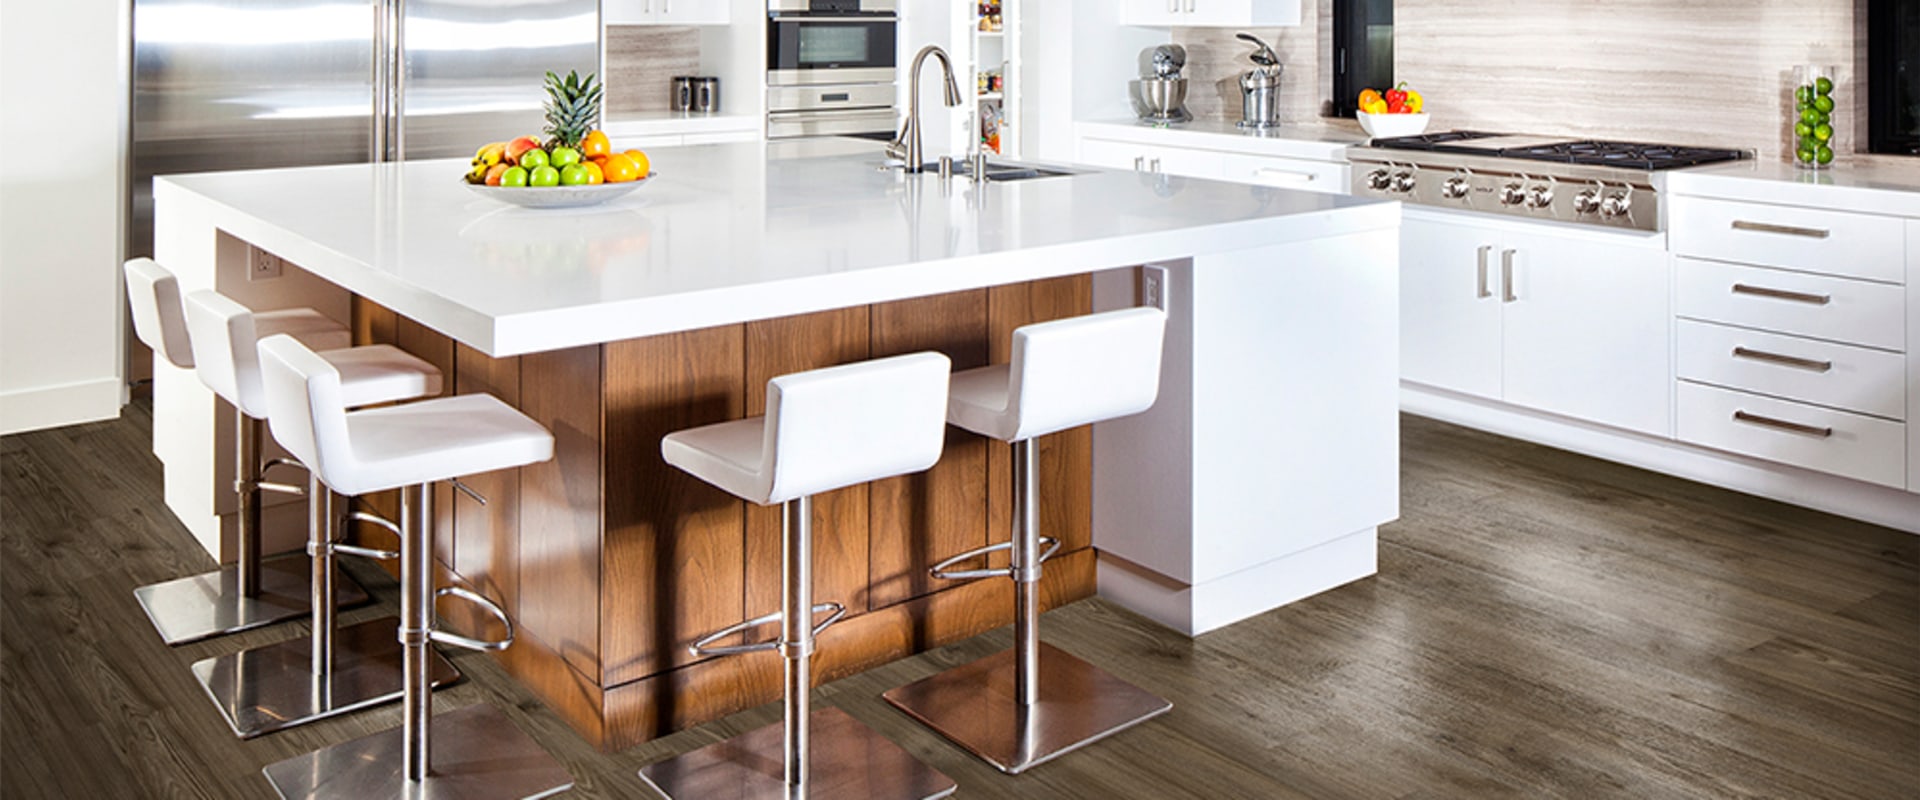 The Most Durable and Low-Maintenance Flooring Options for Your Kitchen